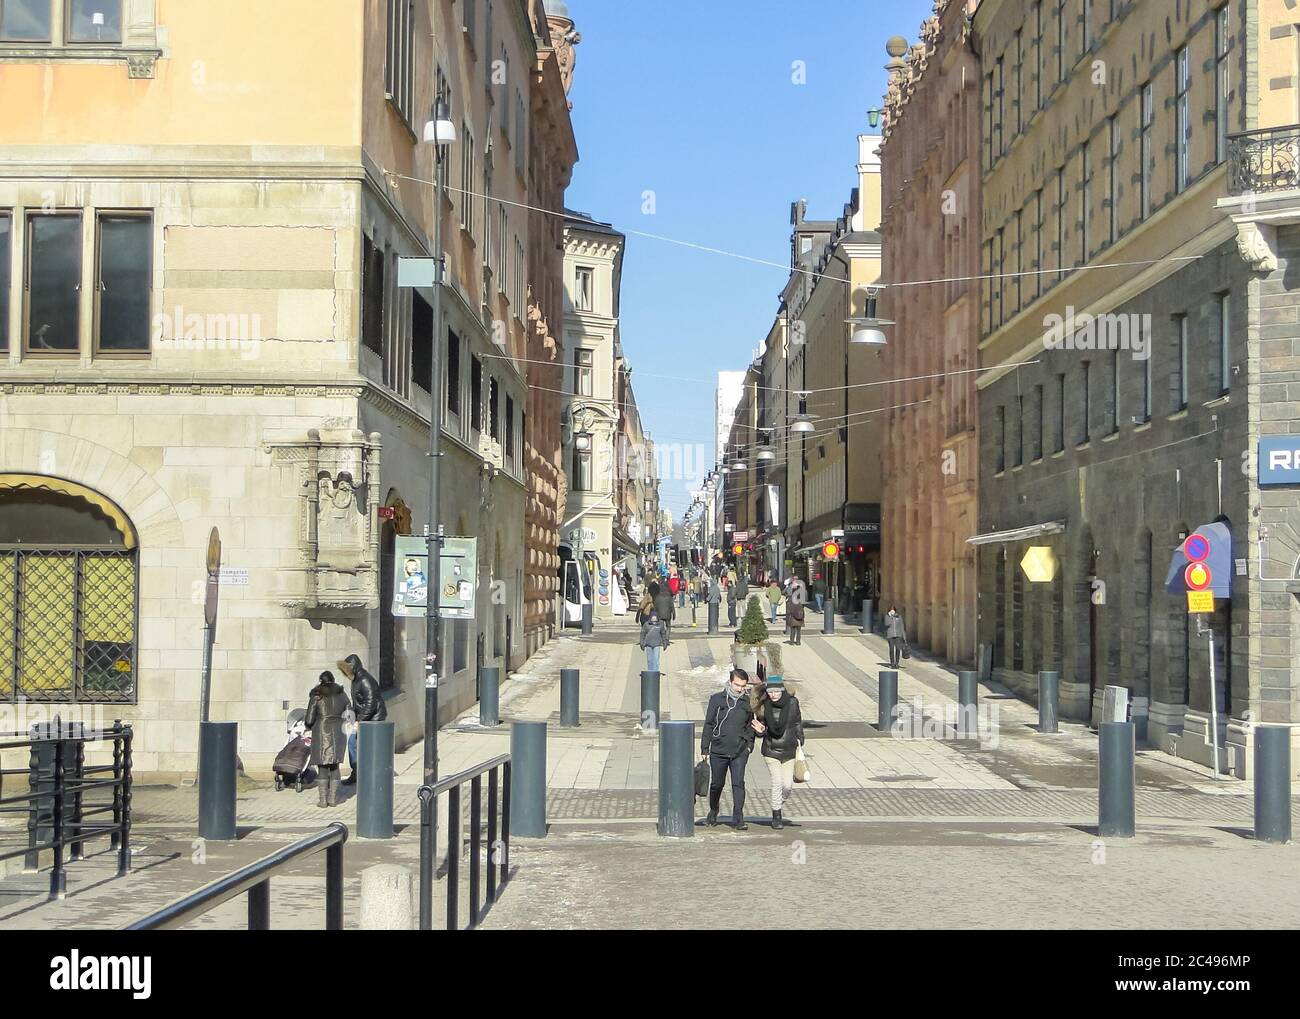 View of Drottninggatan street in spring. One of the central streets of Stockholm, full of shops and restaurants. Sunny day. Stock Photo